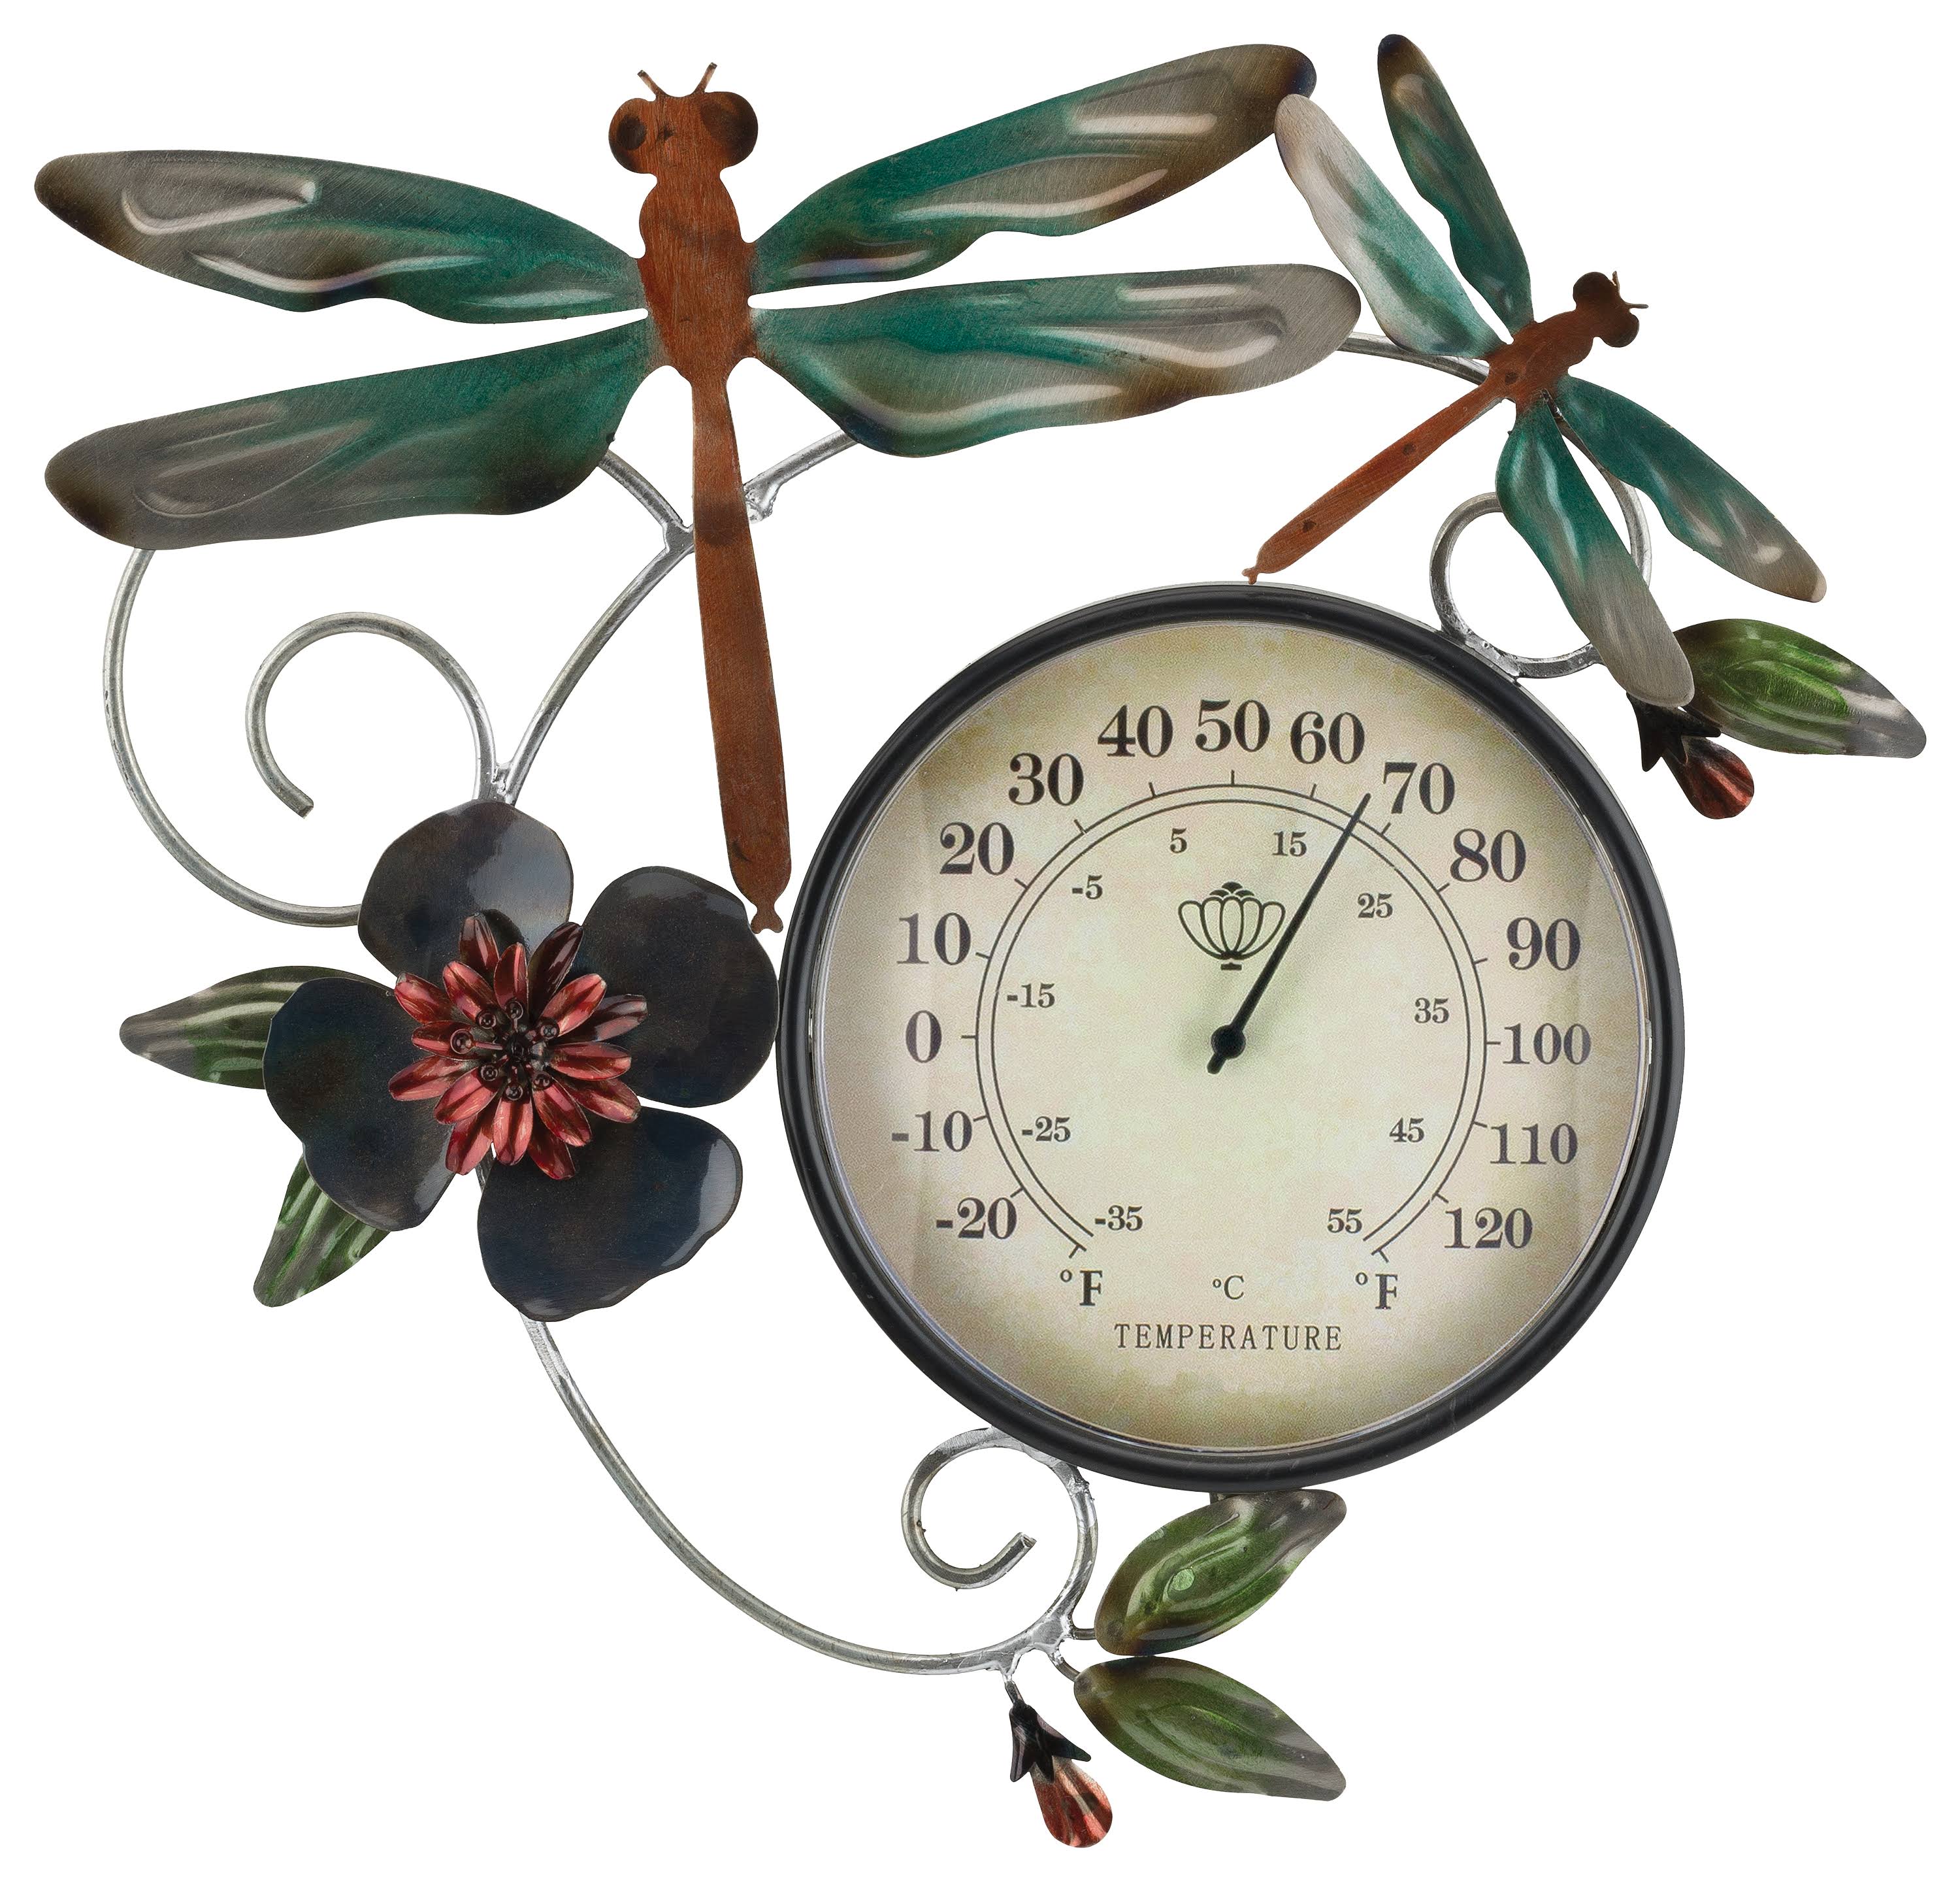 Regal Art & Gift Metallic Dragonfly Outdoor Wall Thermometer one size